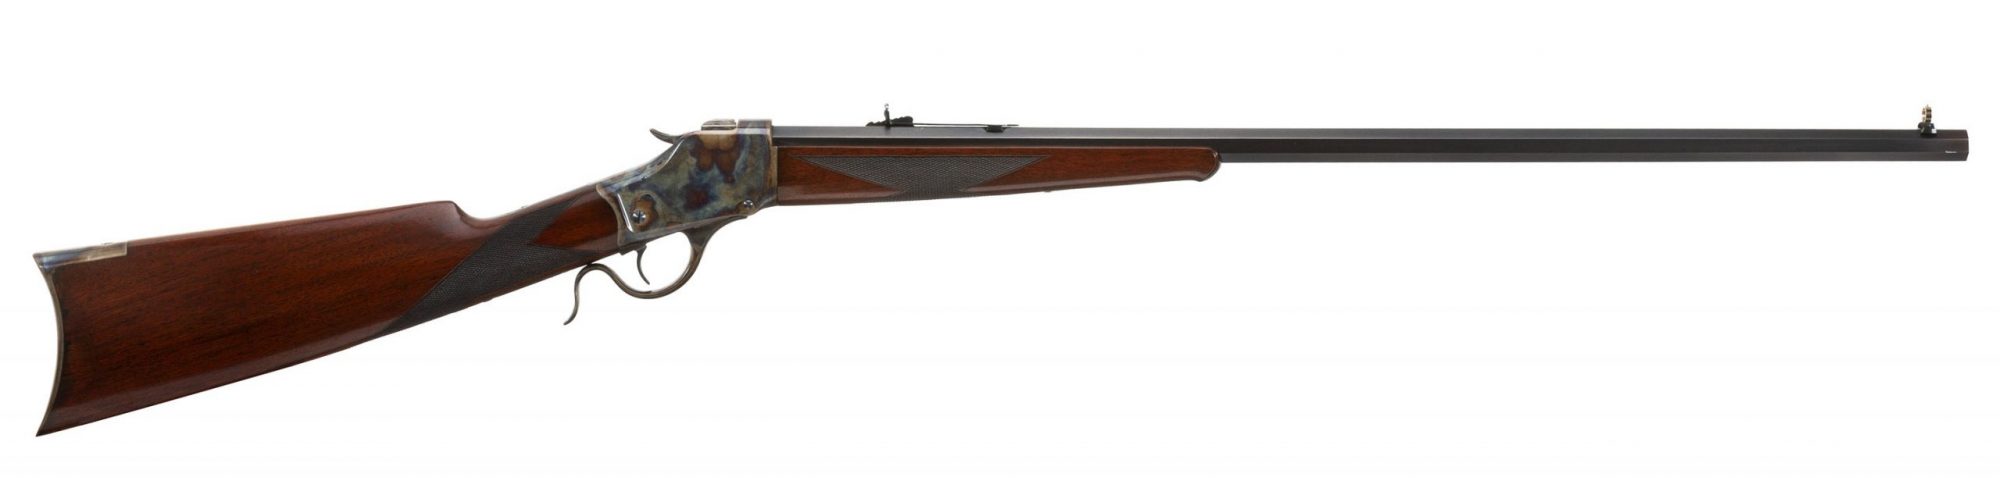 Photo of a Winchester Model 1885 from 1891, restored by Turnbull Restoration in 2006